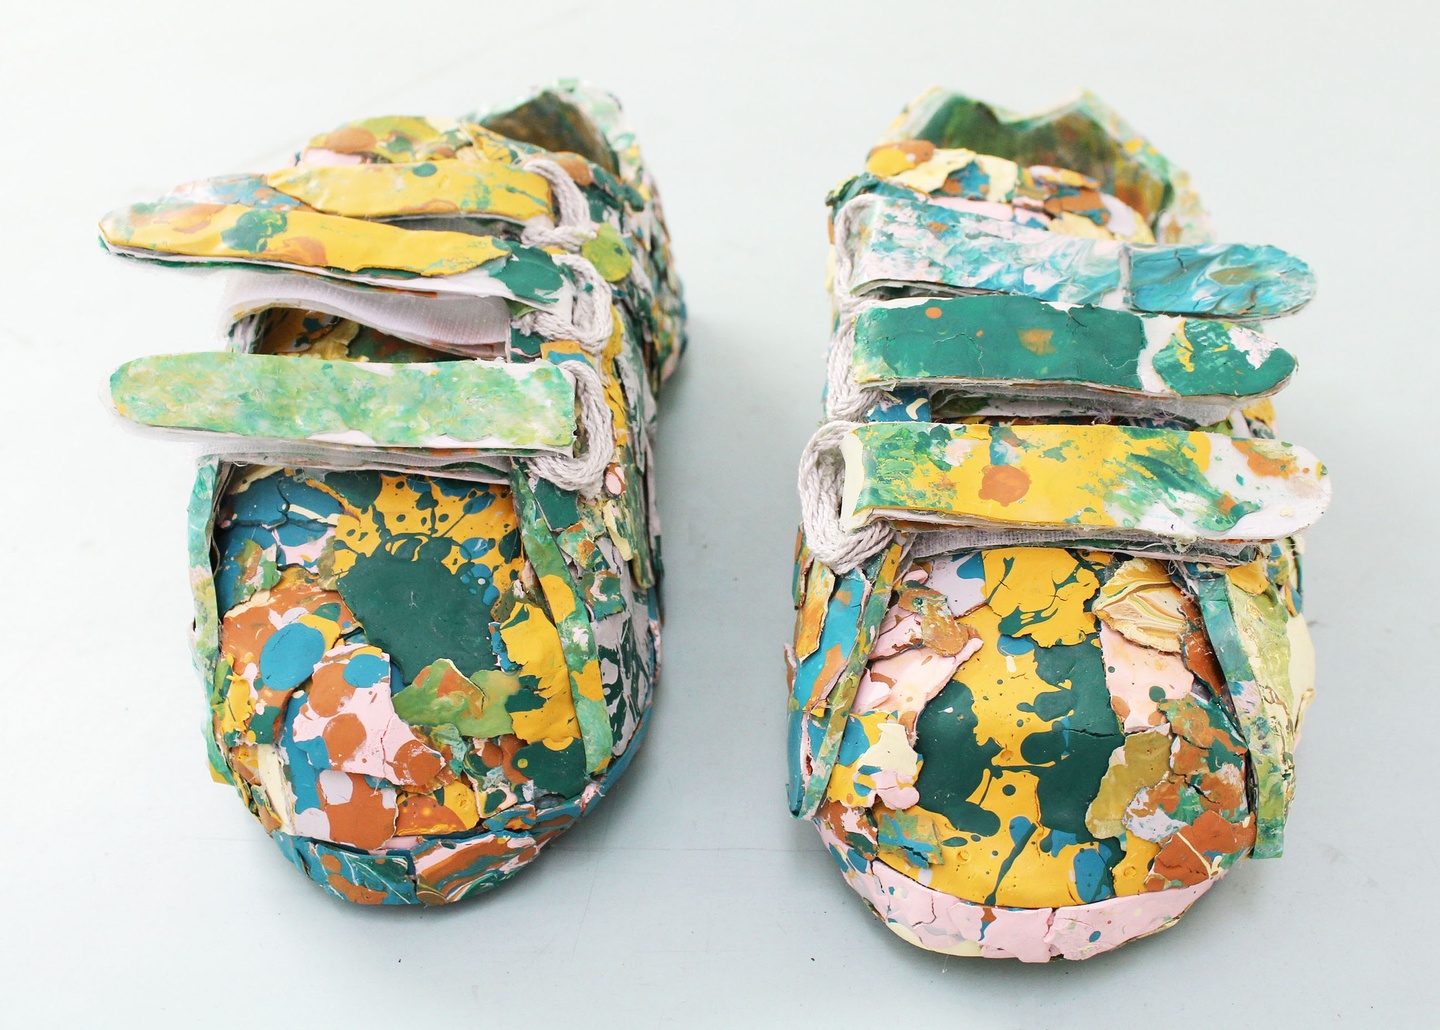 Pair of velcro closure shoes covered in layers of paint blotches in yellow, teal, and shades of pink and clay.